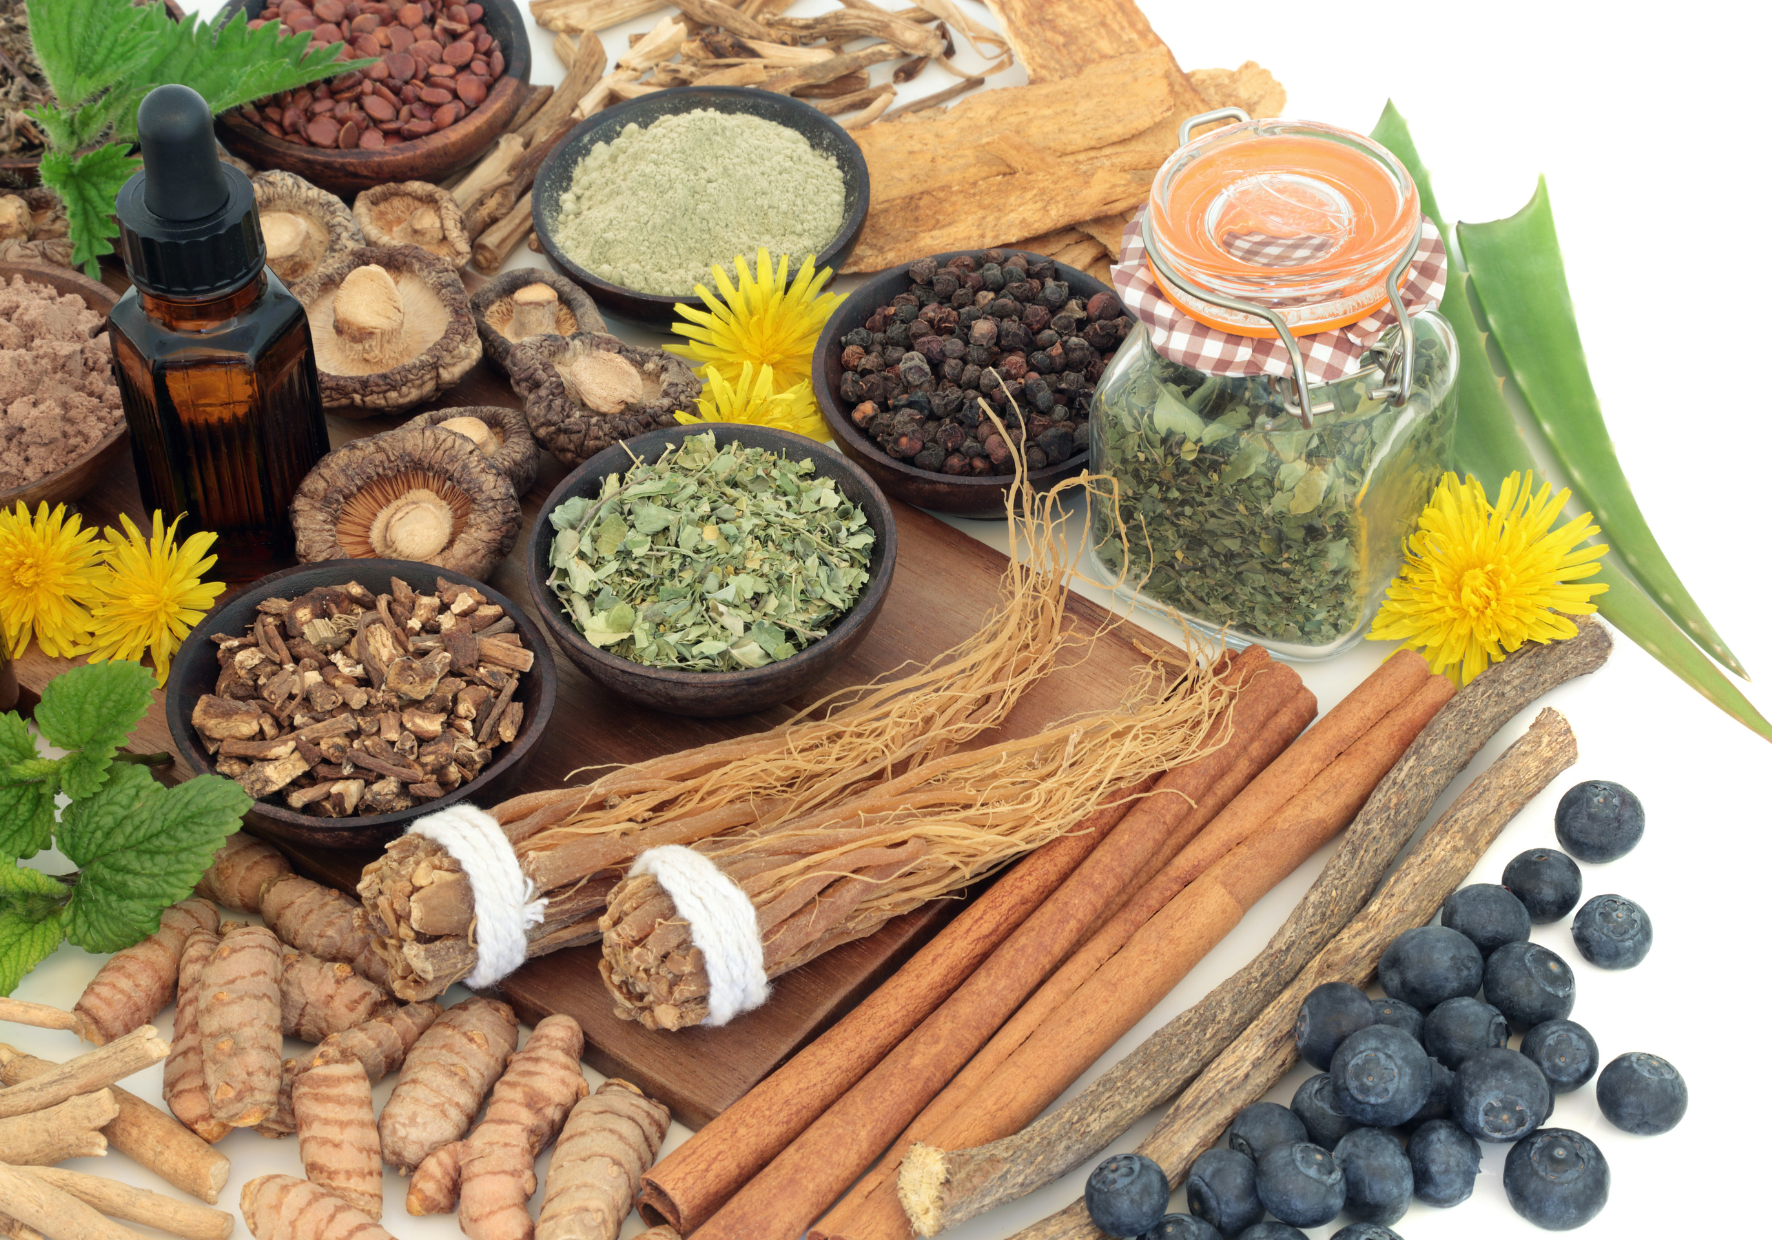 5 Adaptogens To Cleanse Body & Mind